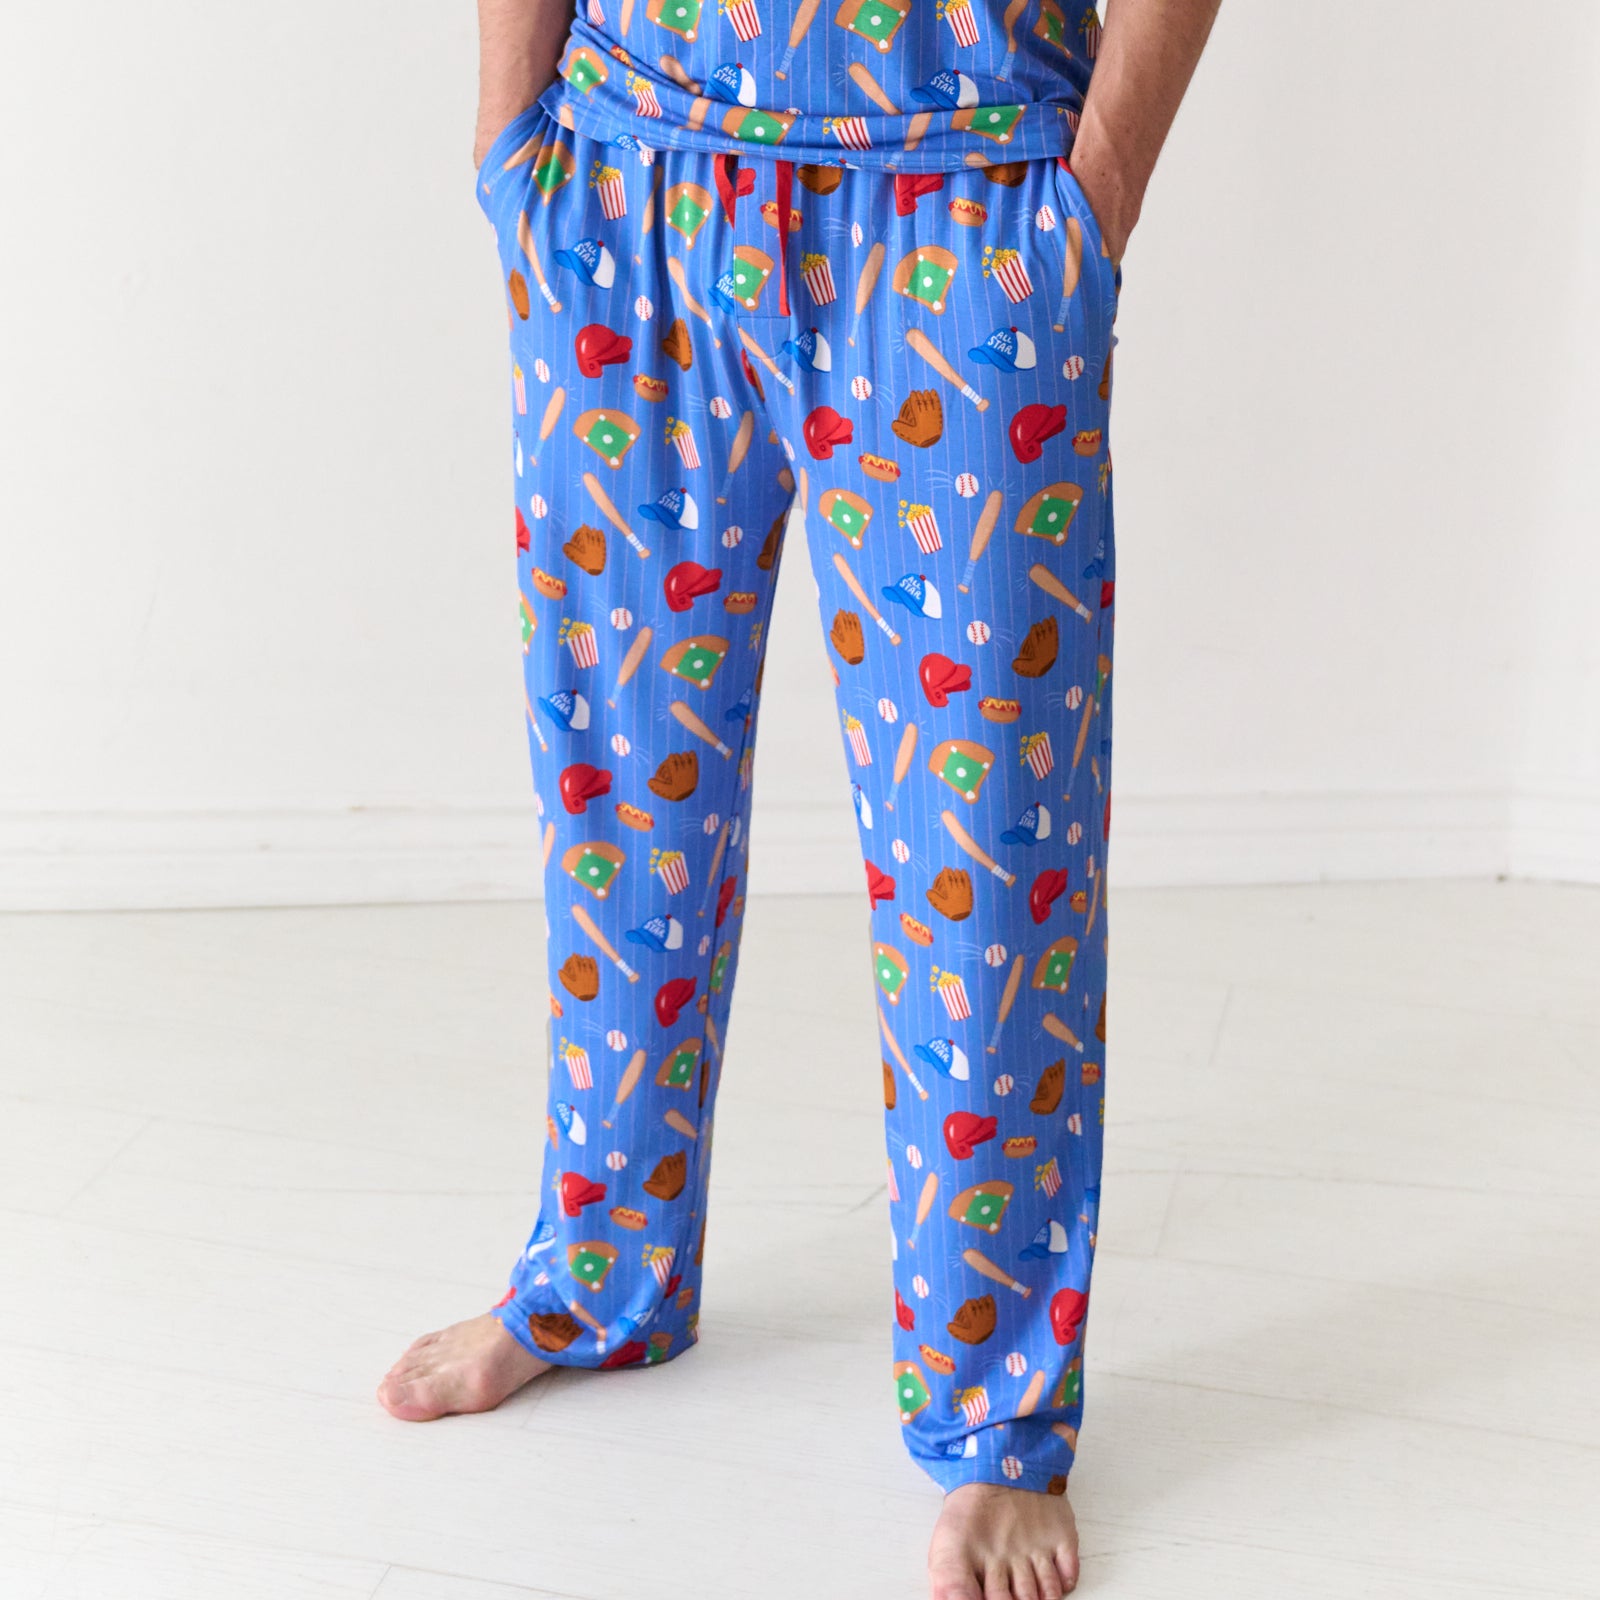 Alternate close up image of a man with his hands in his pockets wearing Blue All Stars men's pajama pants